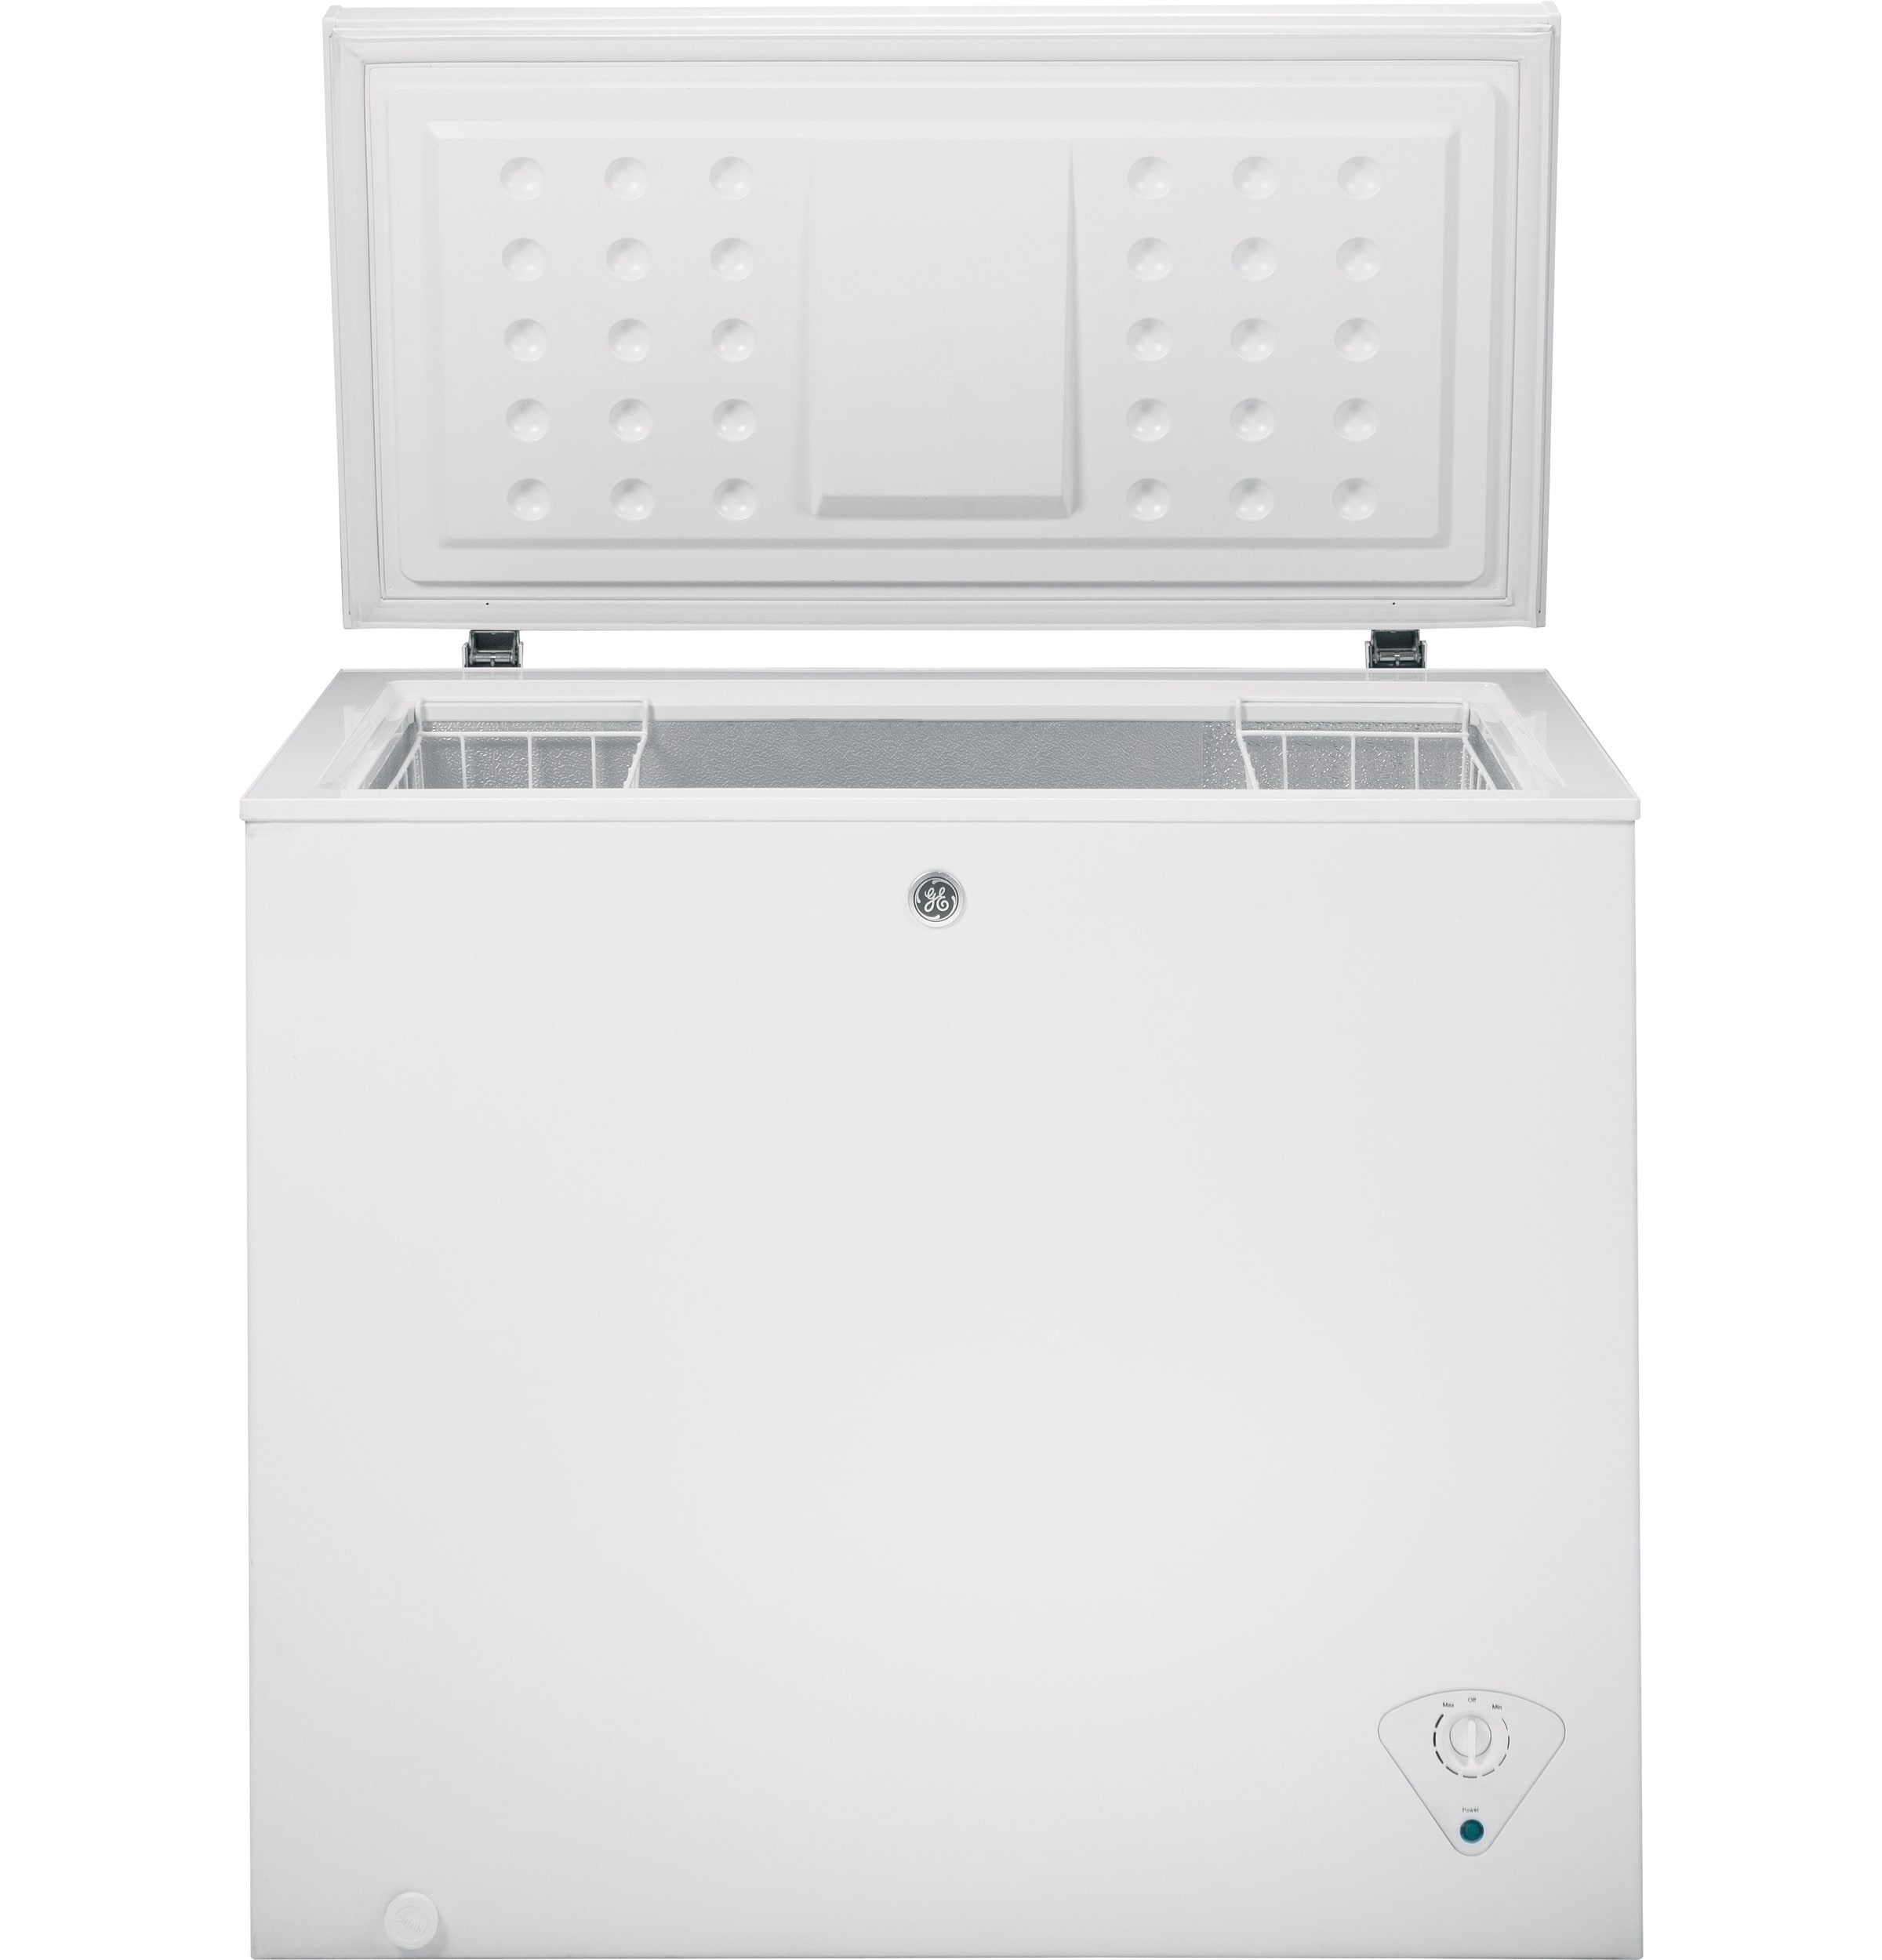 Electric Chest Freezer (7 cubic feet) - A1 Party Rental